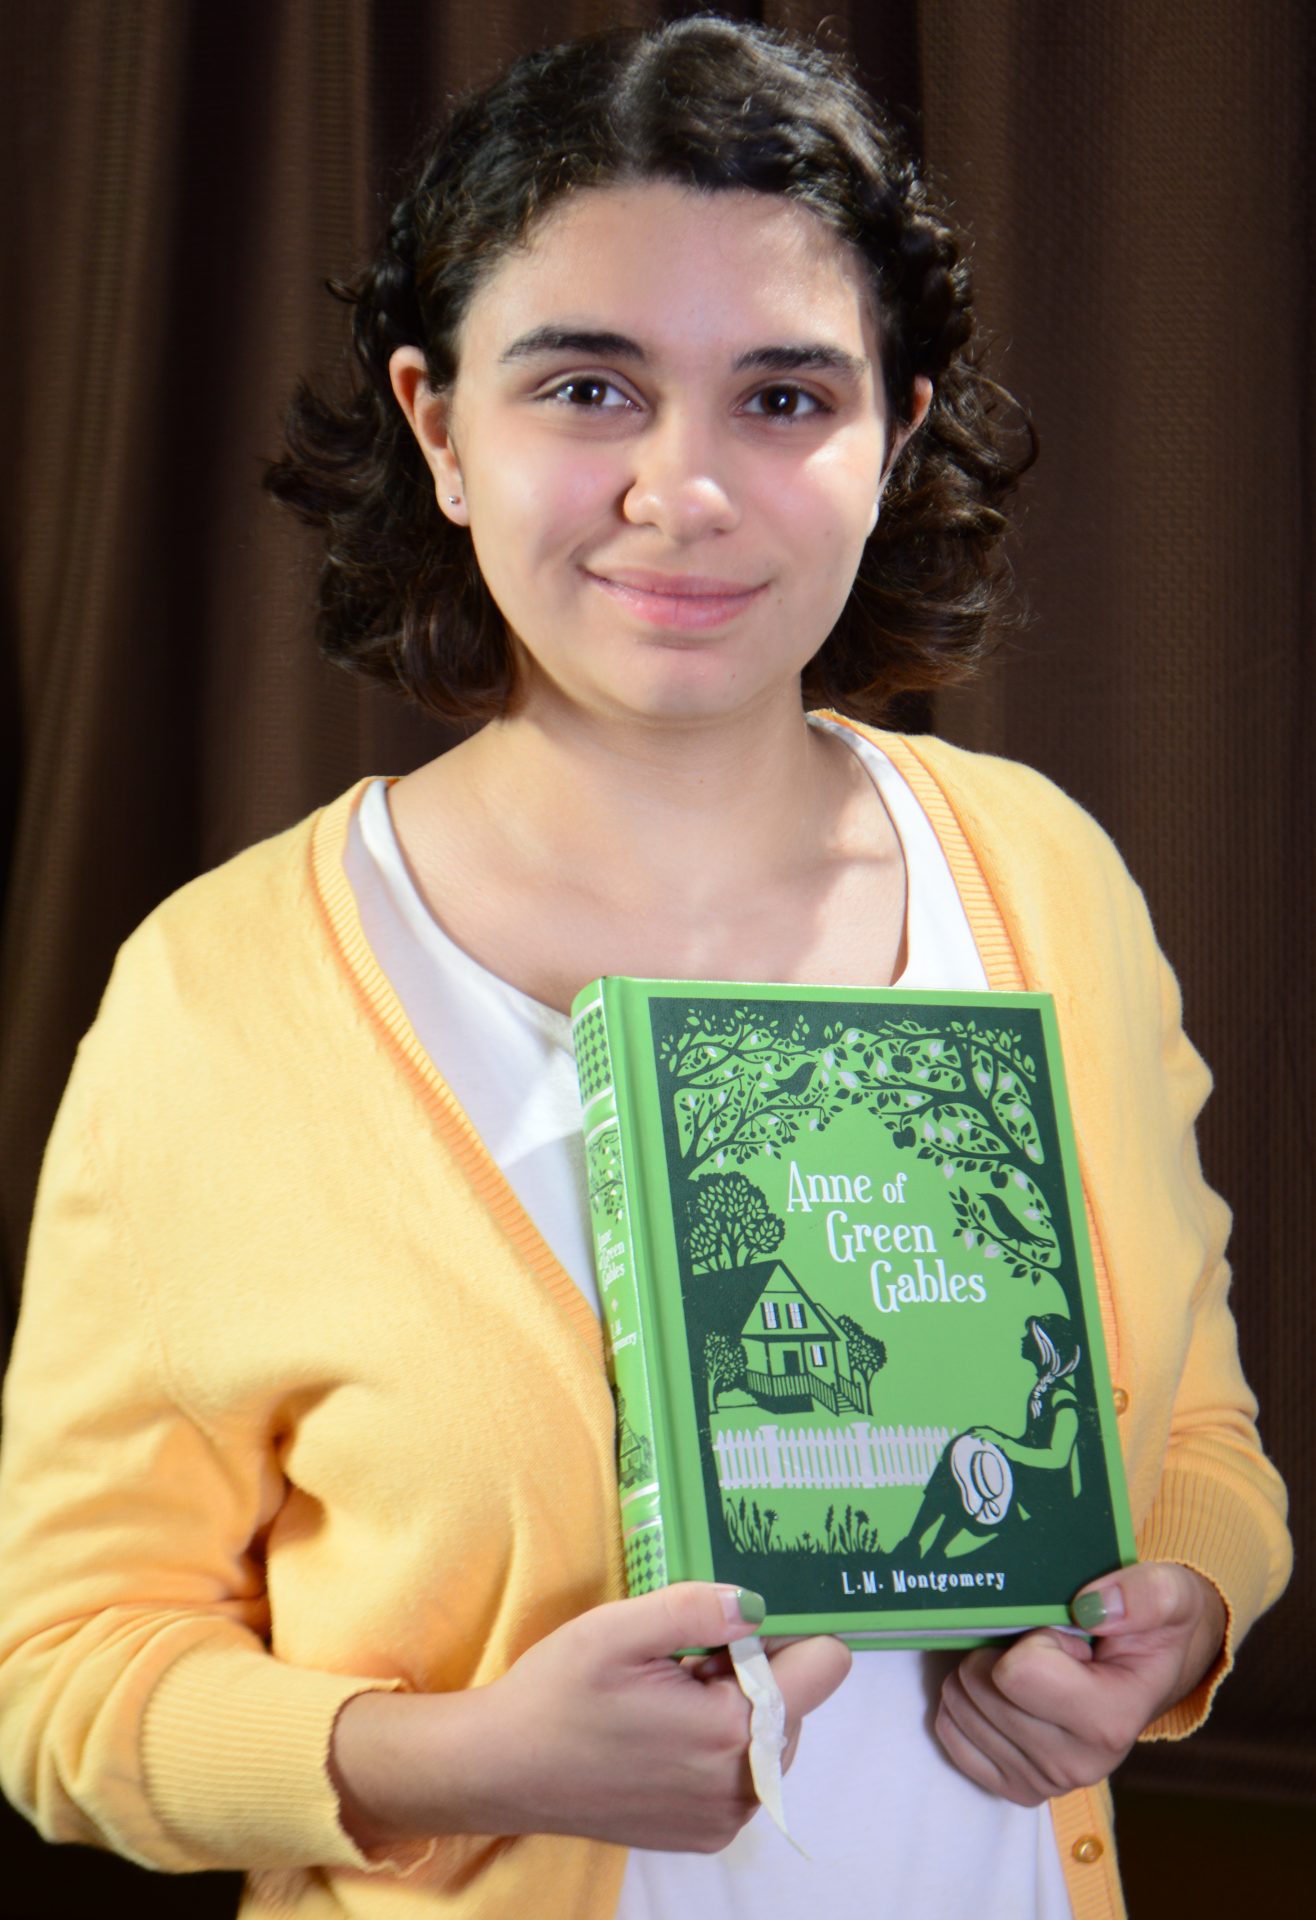 Cecilia holding Anne of Green Gables by L.M. Montgomery, 